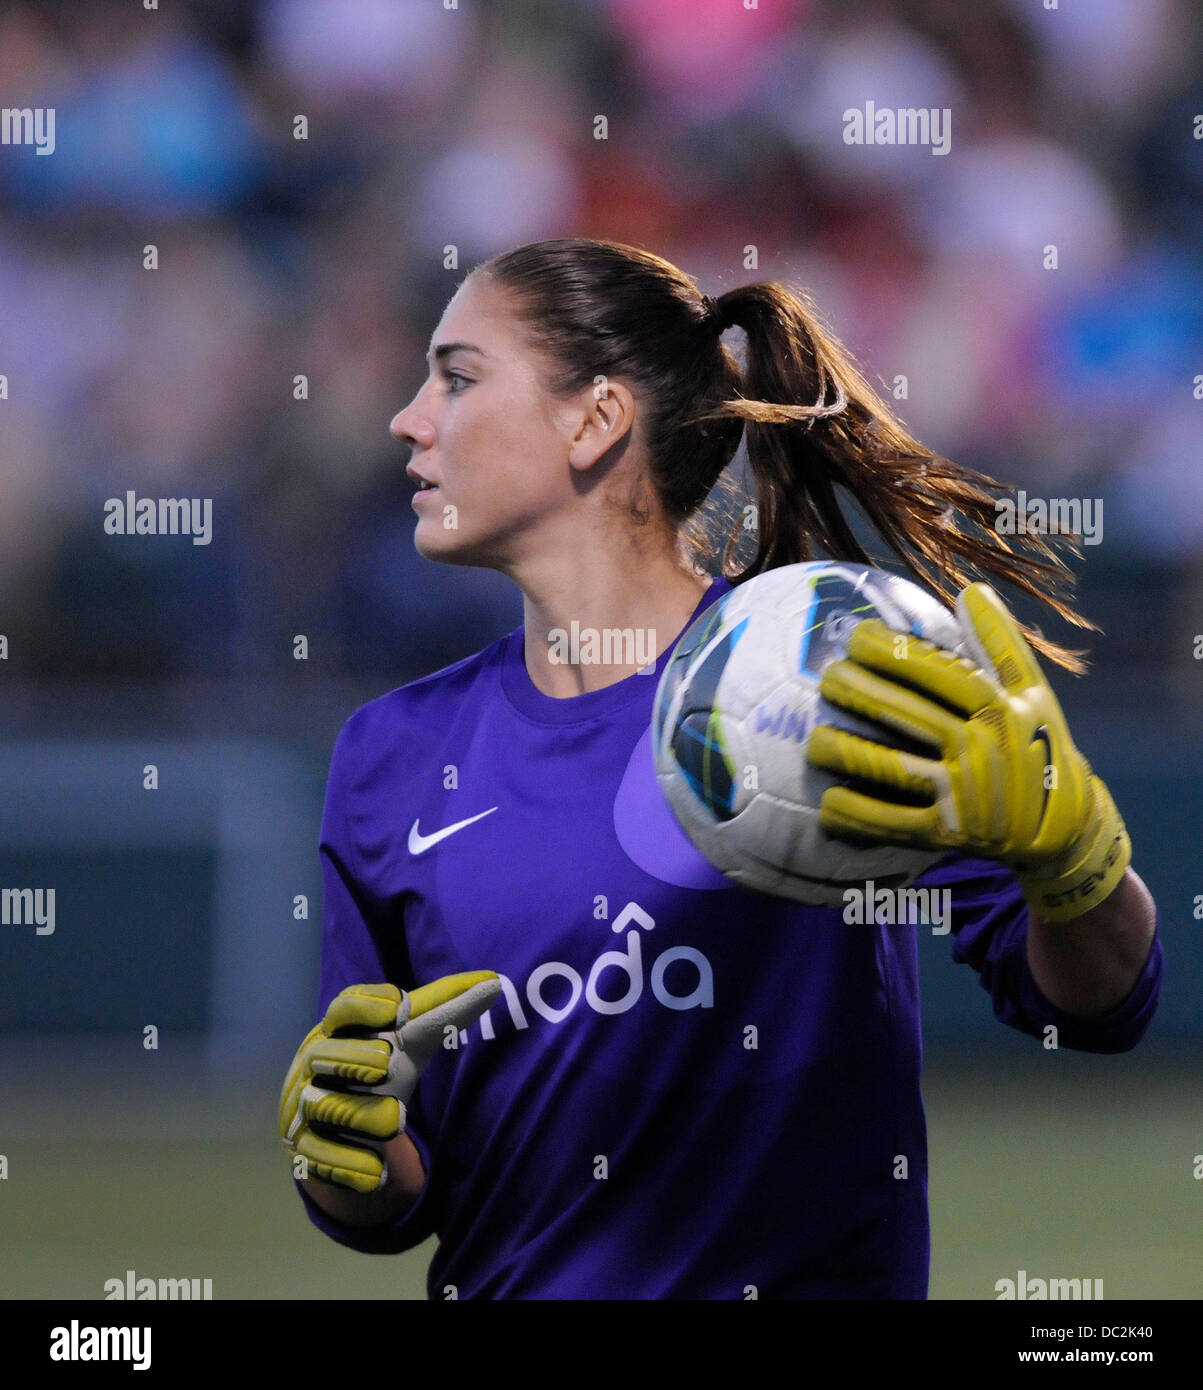 Rochester, NY, USA. 7th Aug, 2013. August 7, 2013: Seattle Reign FC goalkeeper Hope Solo #1 in action during the second half of play. The Western New York Flash defeated the Seattle Reign FC 1-0 at Sahlen's Stadium in Rochester, NY. Credit:  csm/Alamy Live News Stock Photo